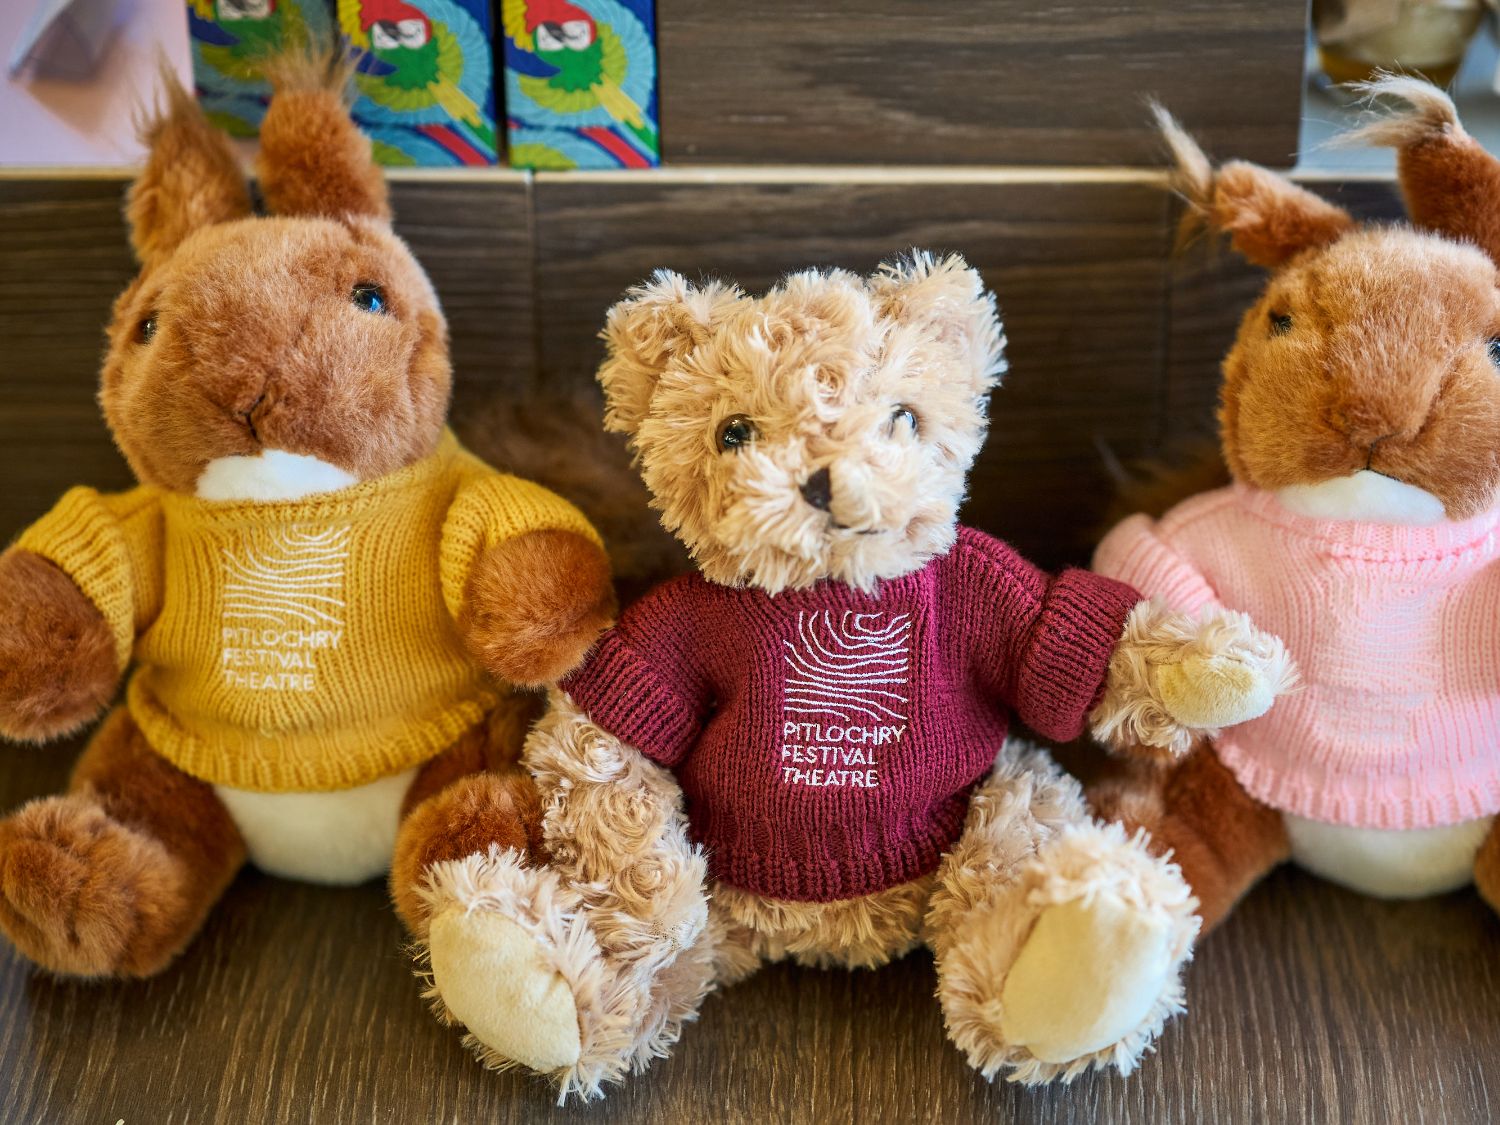 Stuffed toys with knitted jumpers on that have the Pitlochry Festival theatre logo embroidered.